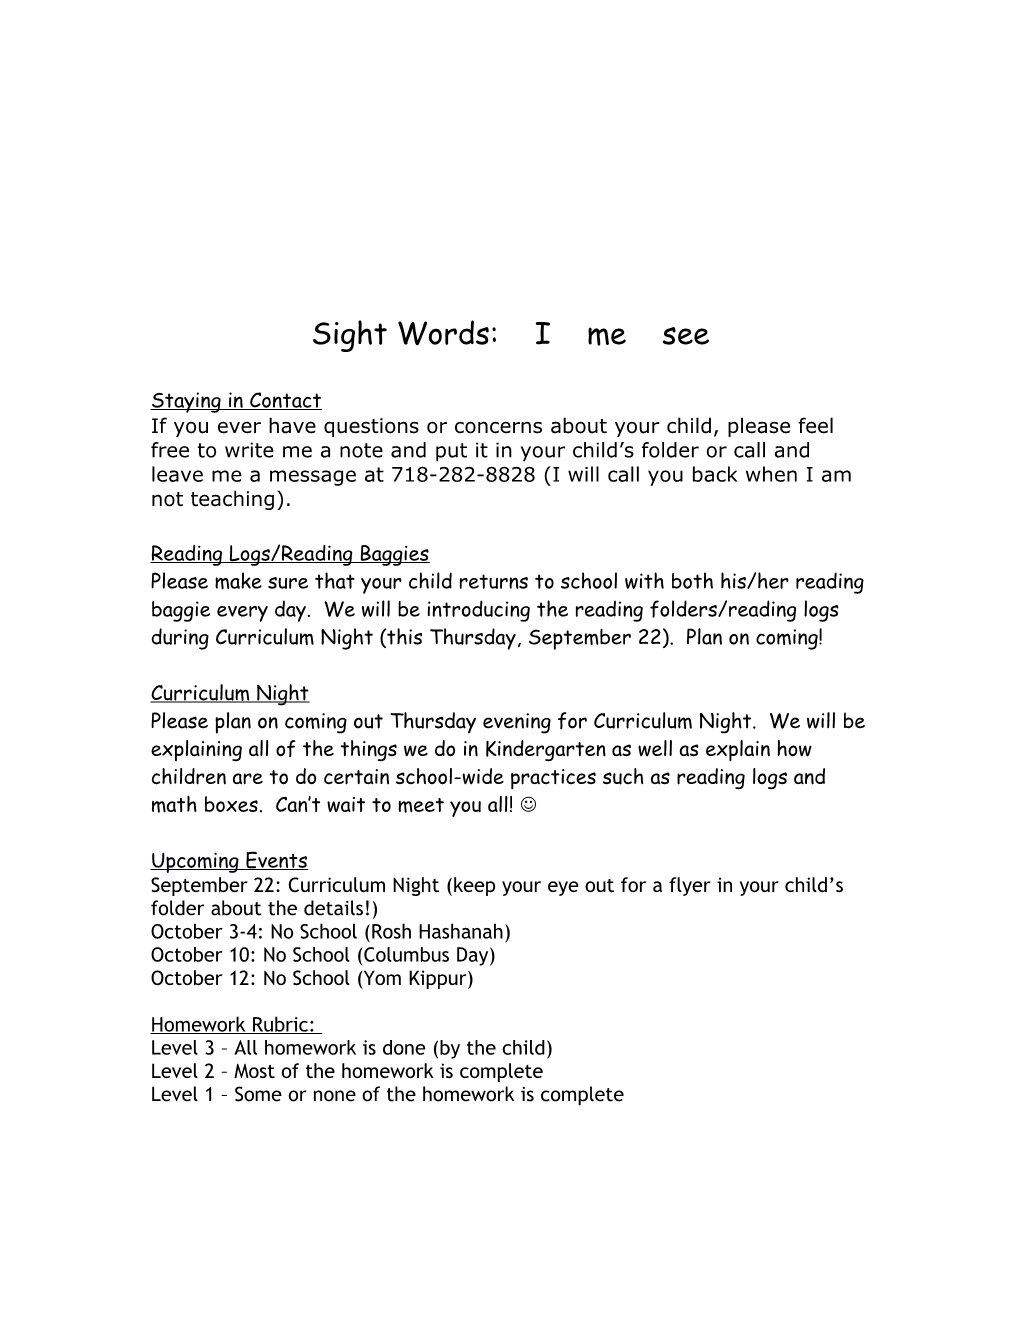 Sight Words: I Me See